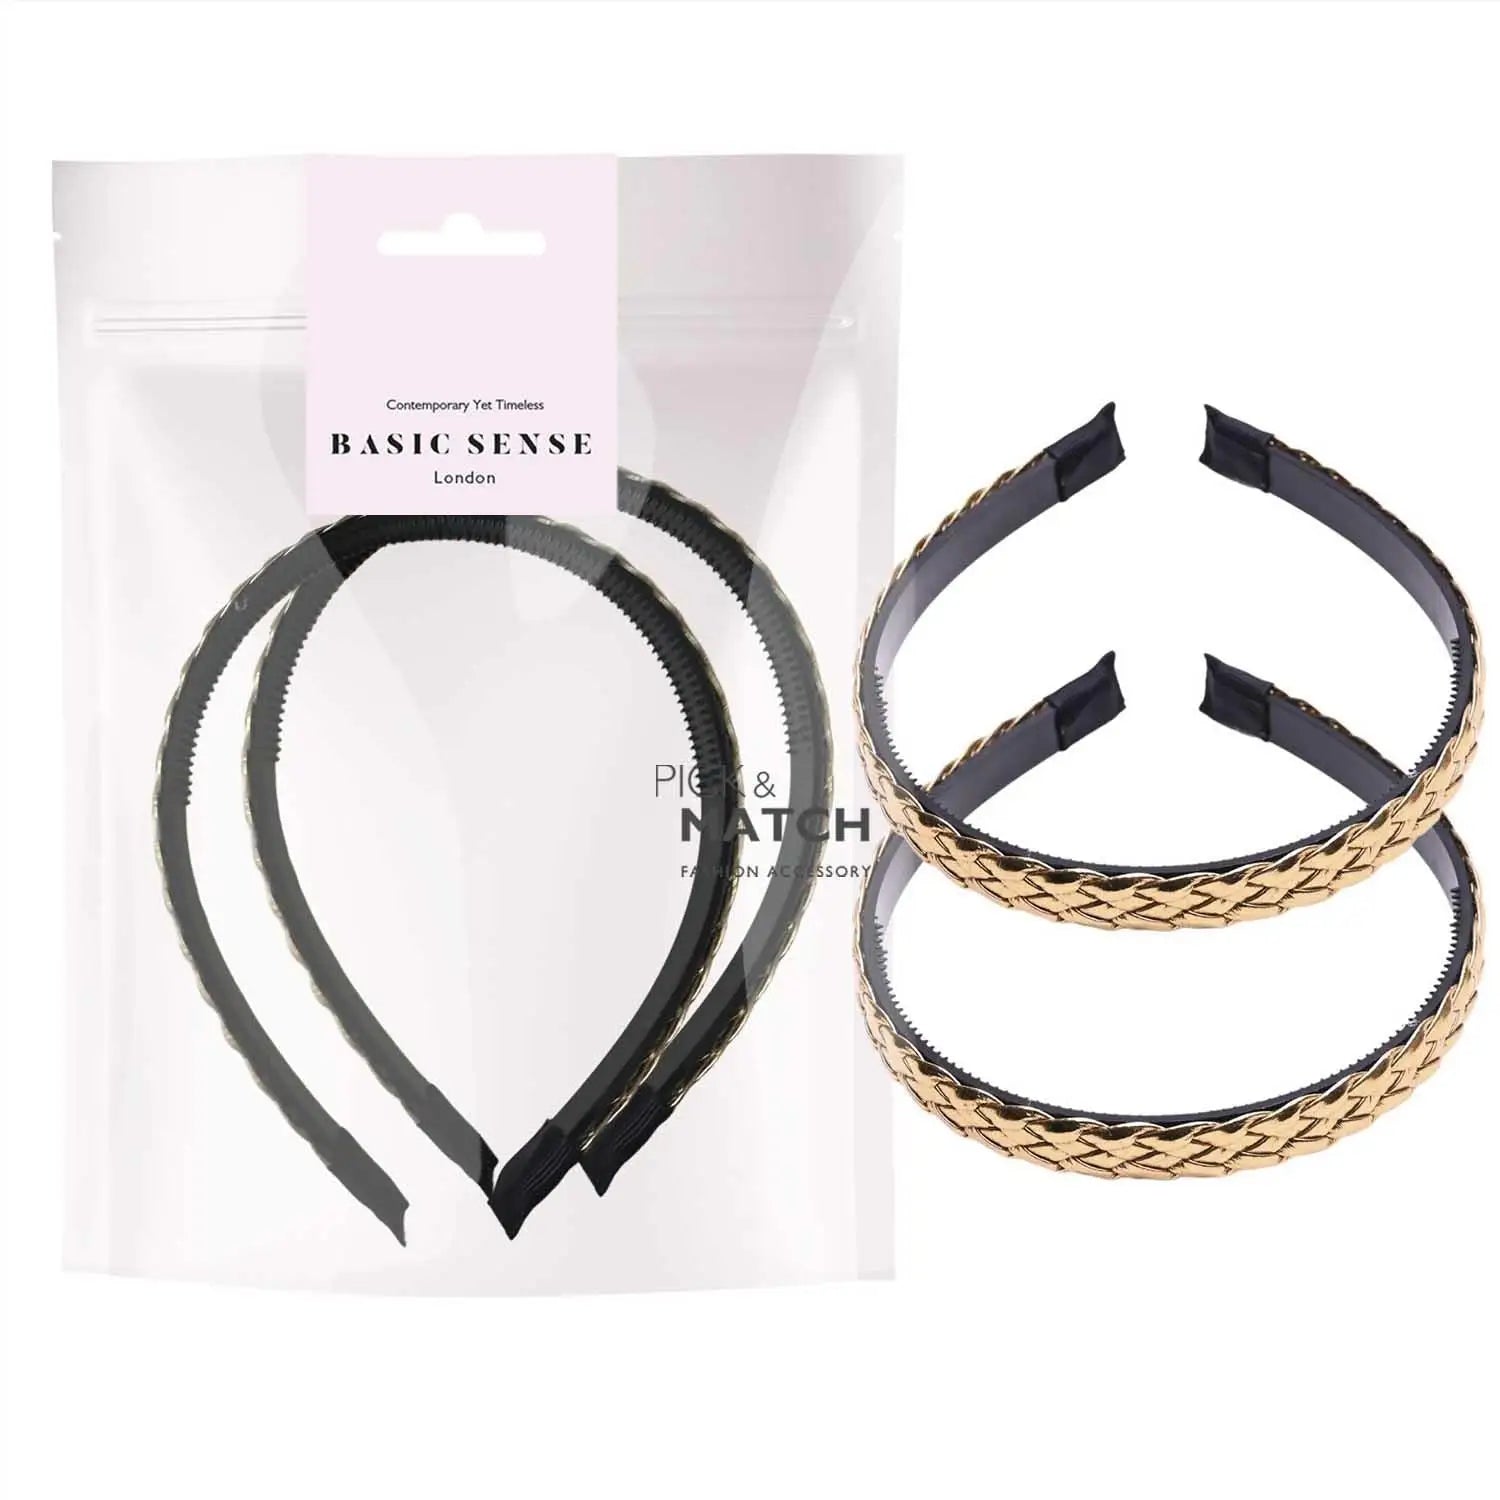 Black and gold leather braided headbands for women - 2pcs